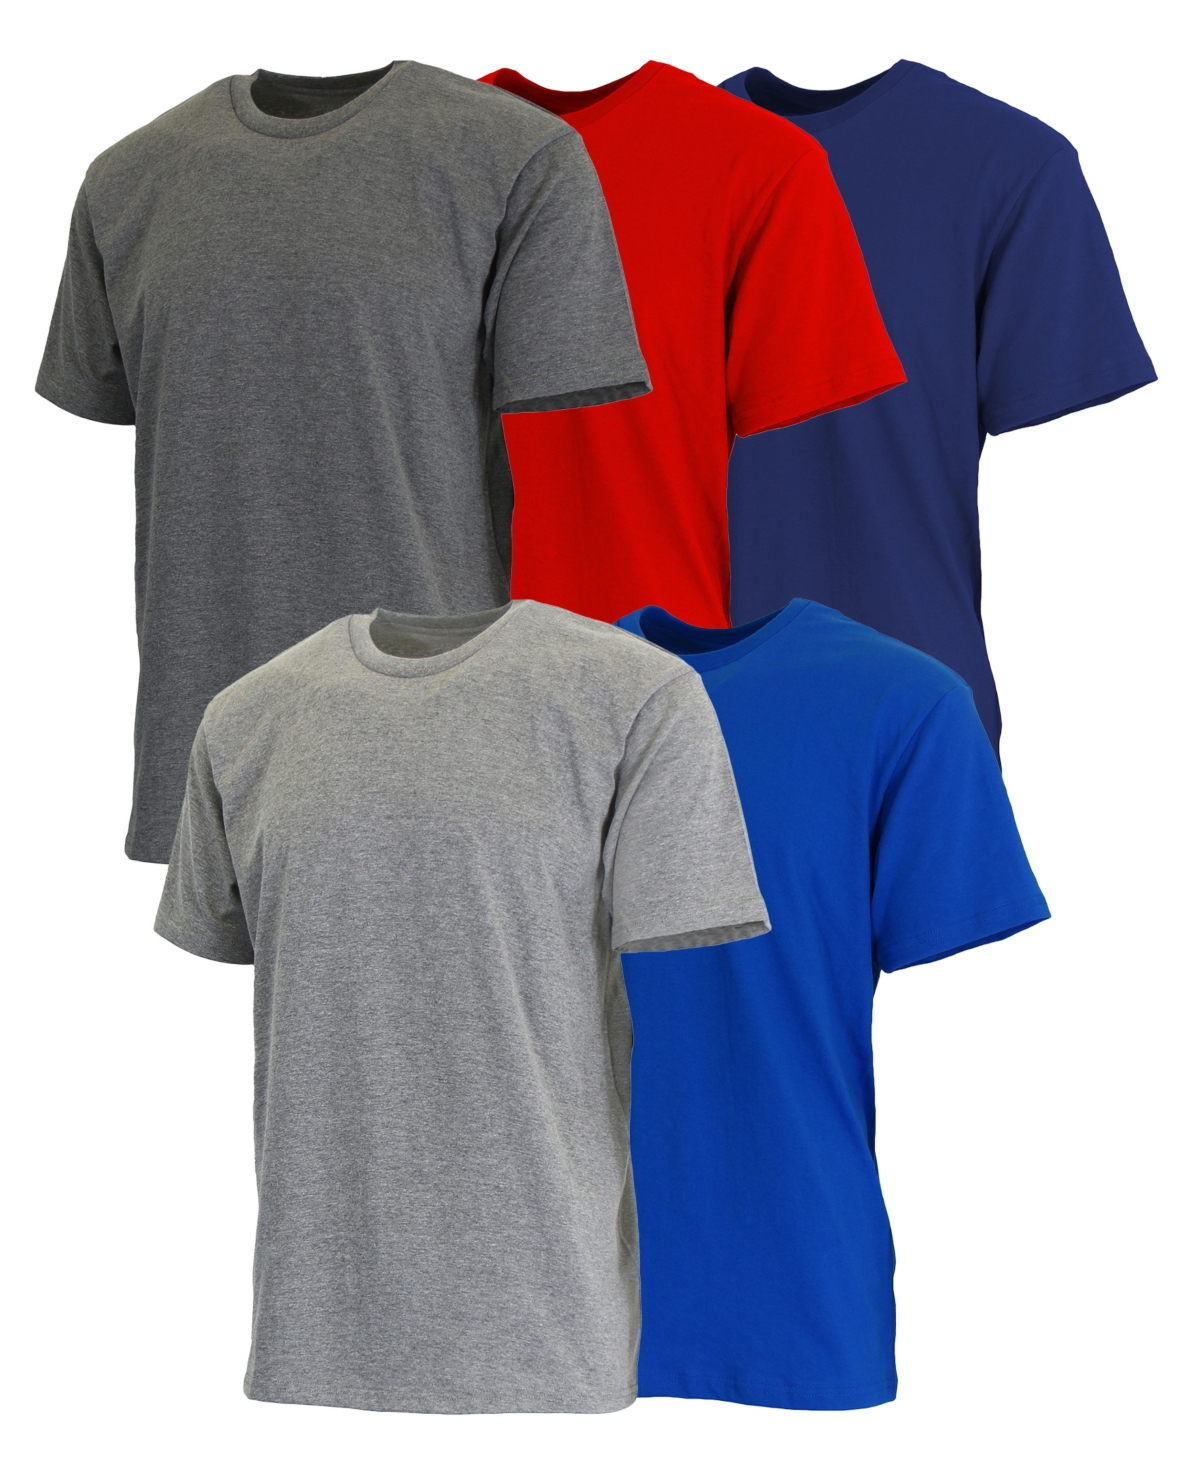 Men's Short Sleeve Crew Neck Tee-5 Pack - Red-Navy-Heather Grey-White-Royal